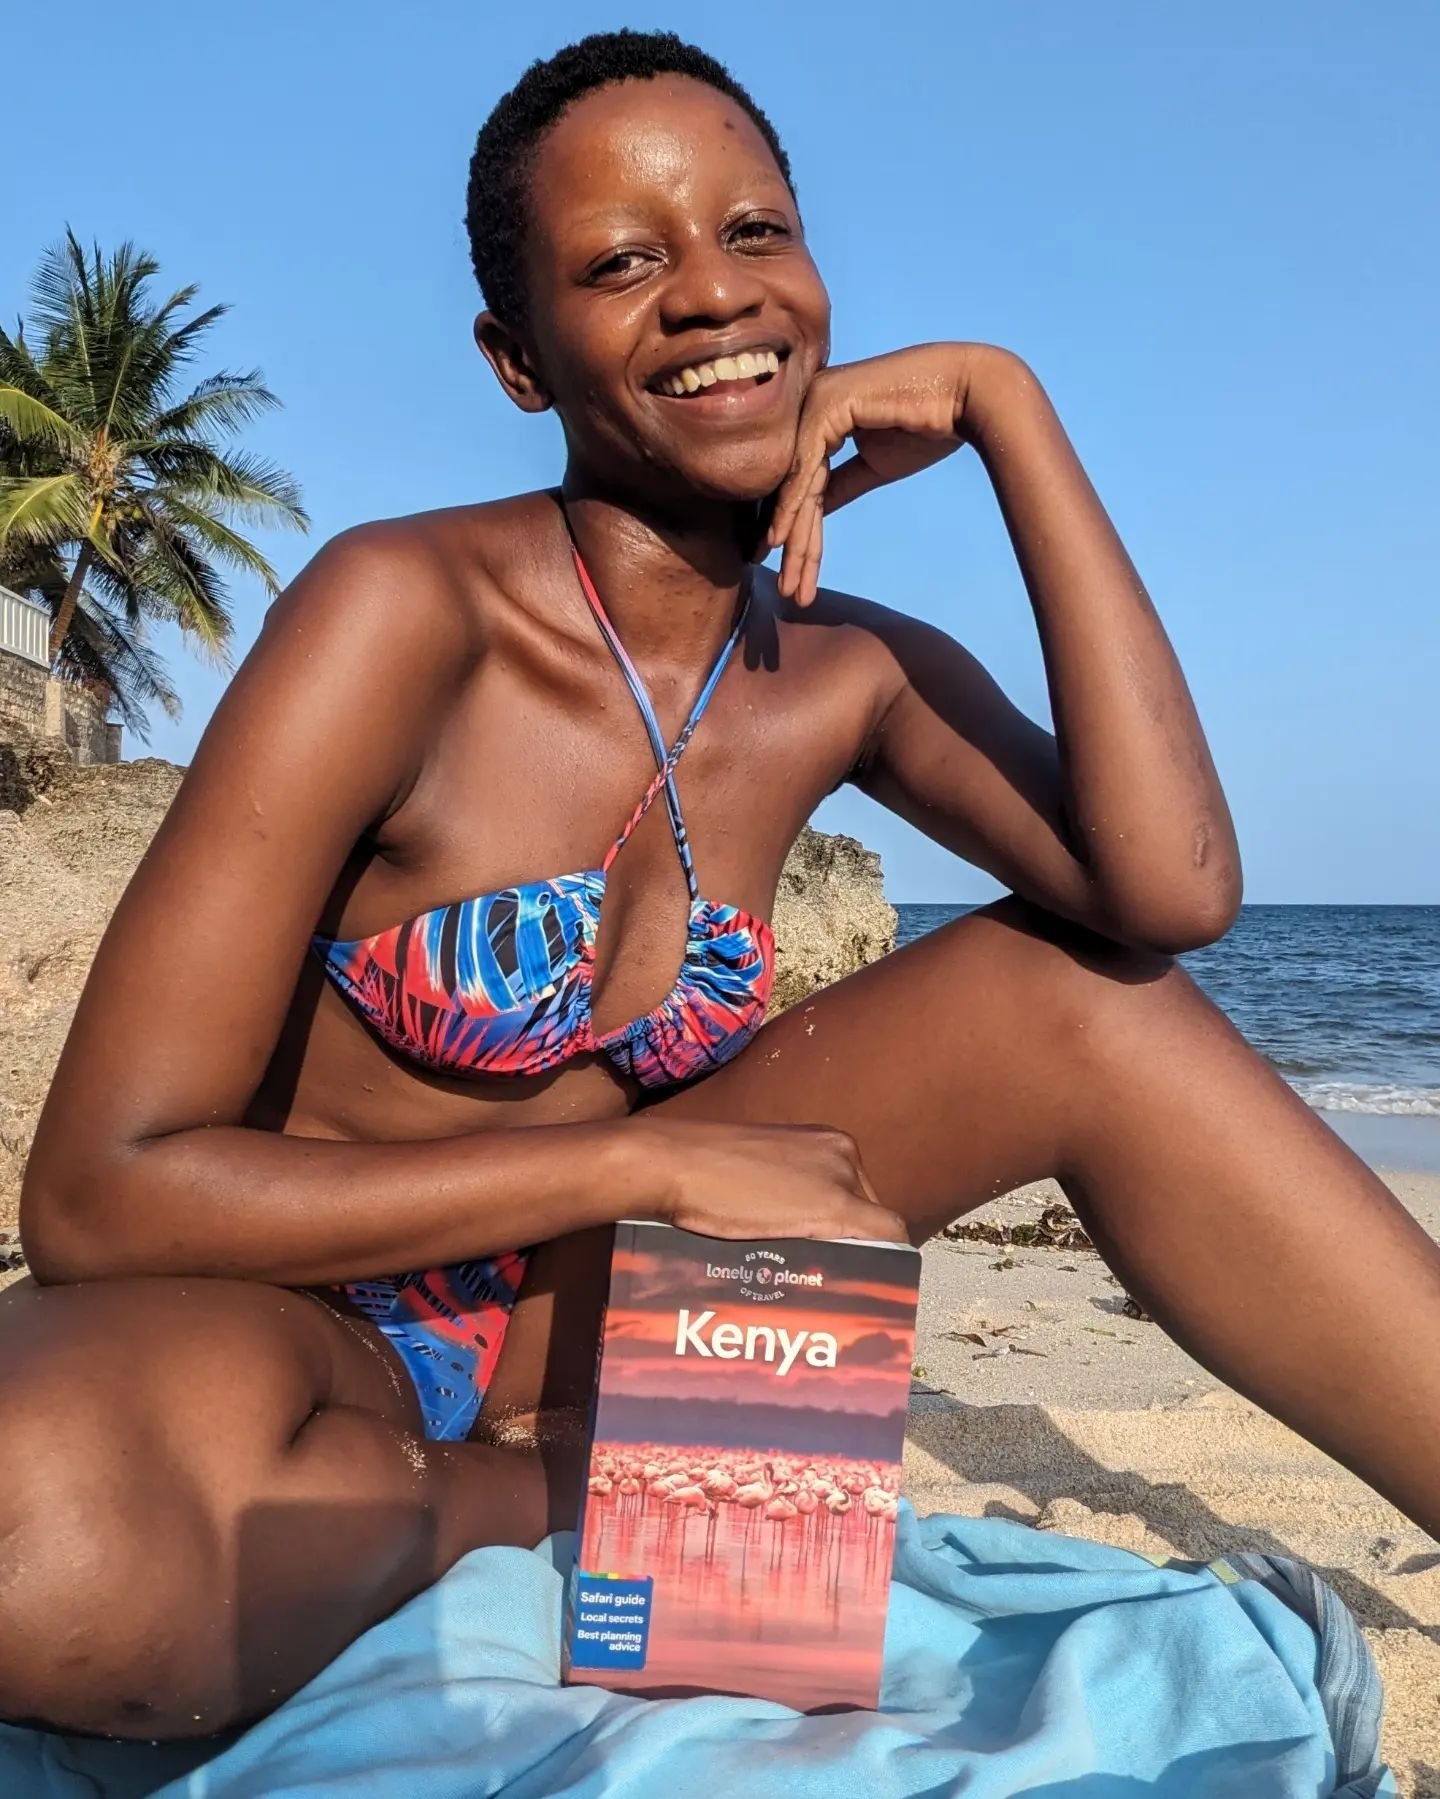 🥳📚🕺🏾IT'S OUT!! 
The @lonelyplanet Kenya guide book (edition 11) was the focus of a lot of my year, traveling through Western Kenya and the North Coast researching what there is to do and see and who makes the regions what they are.

Traversing my